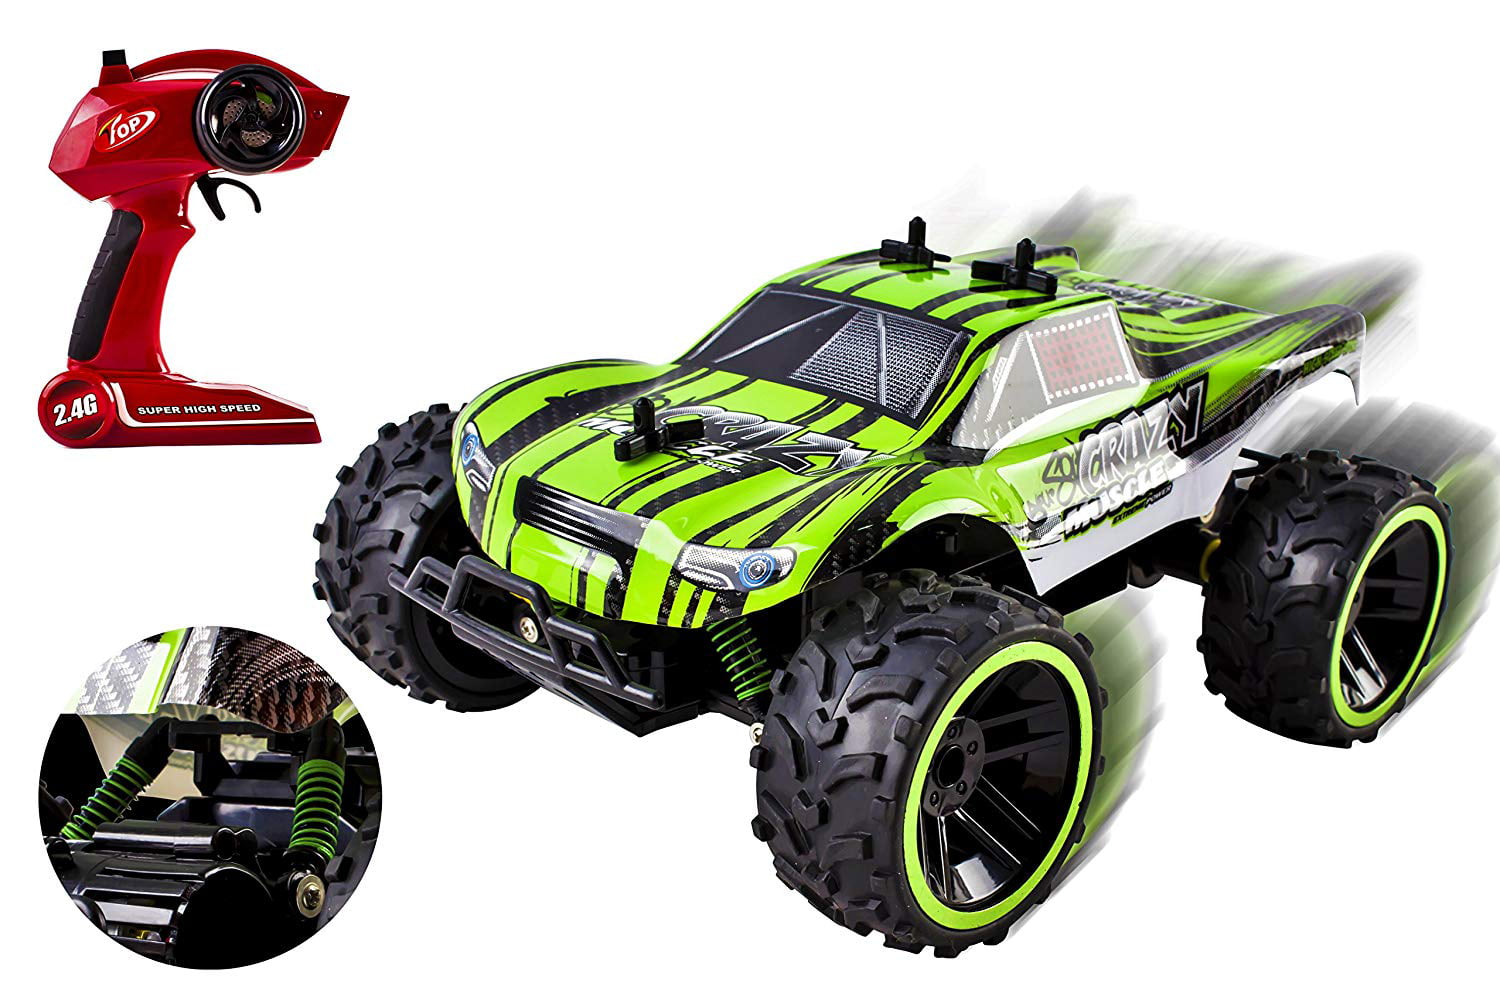 LARGE REMOTE CONTROL RC X-KNIGHT V2 BIG WHEEL BUGGY BUGGY UP to 20KM/PH 2.4 GHz 